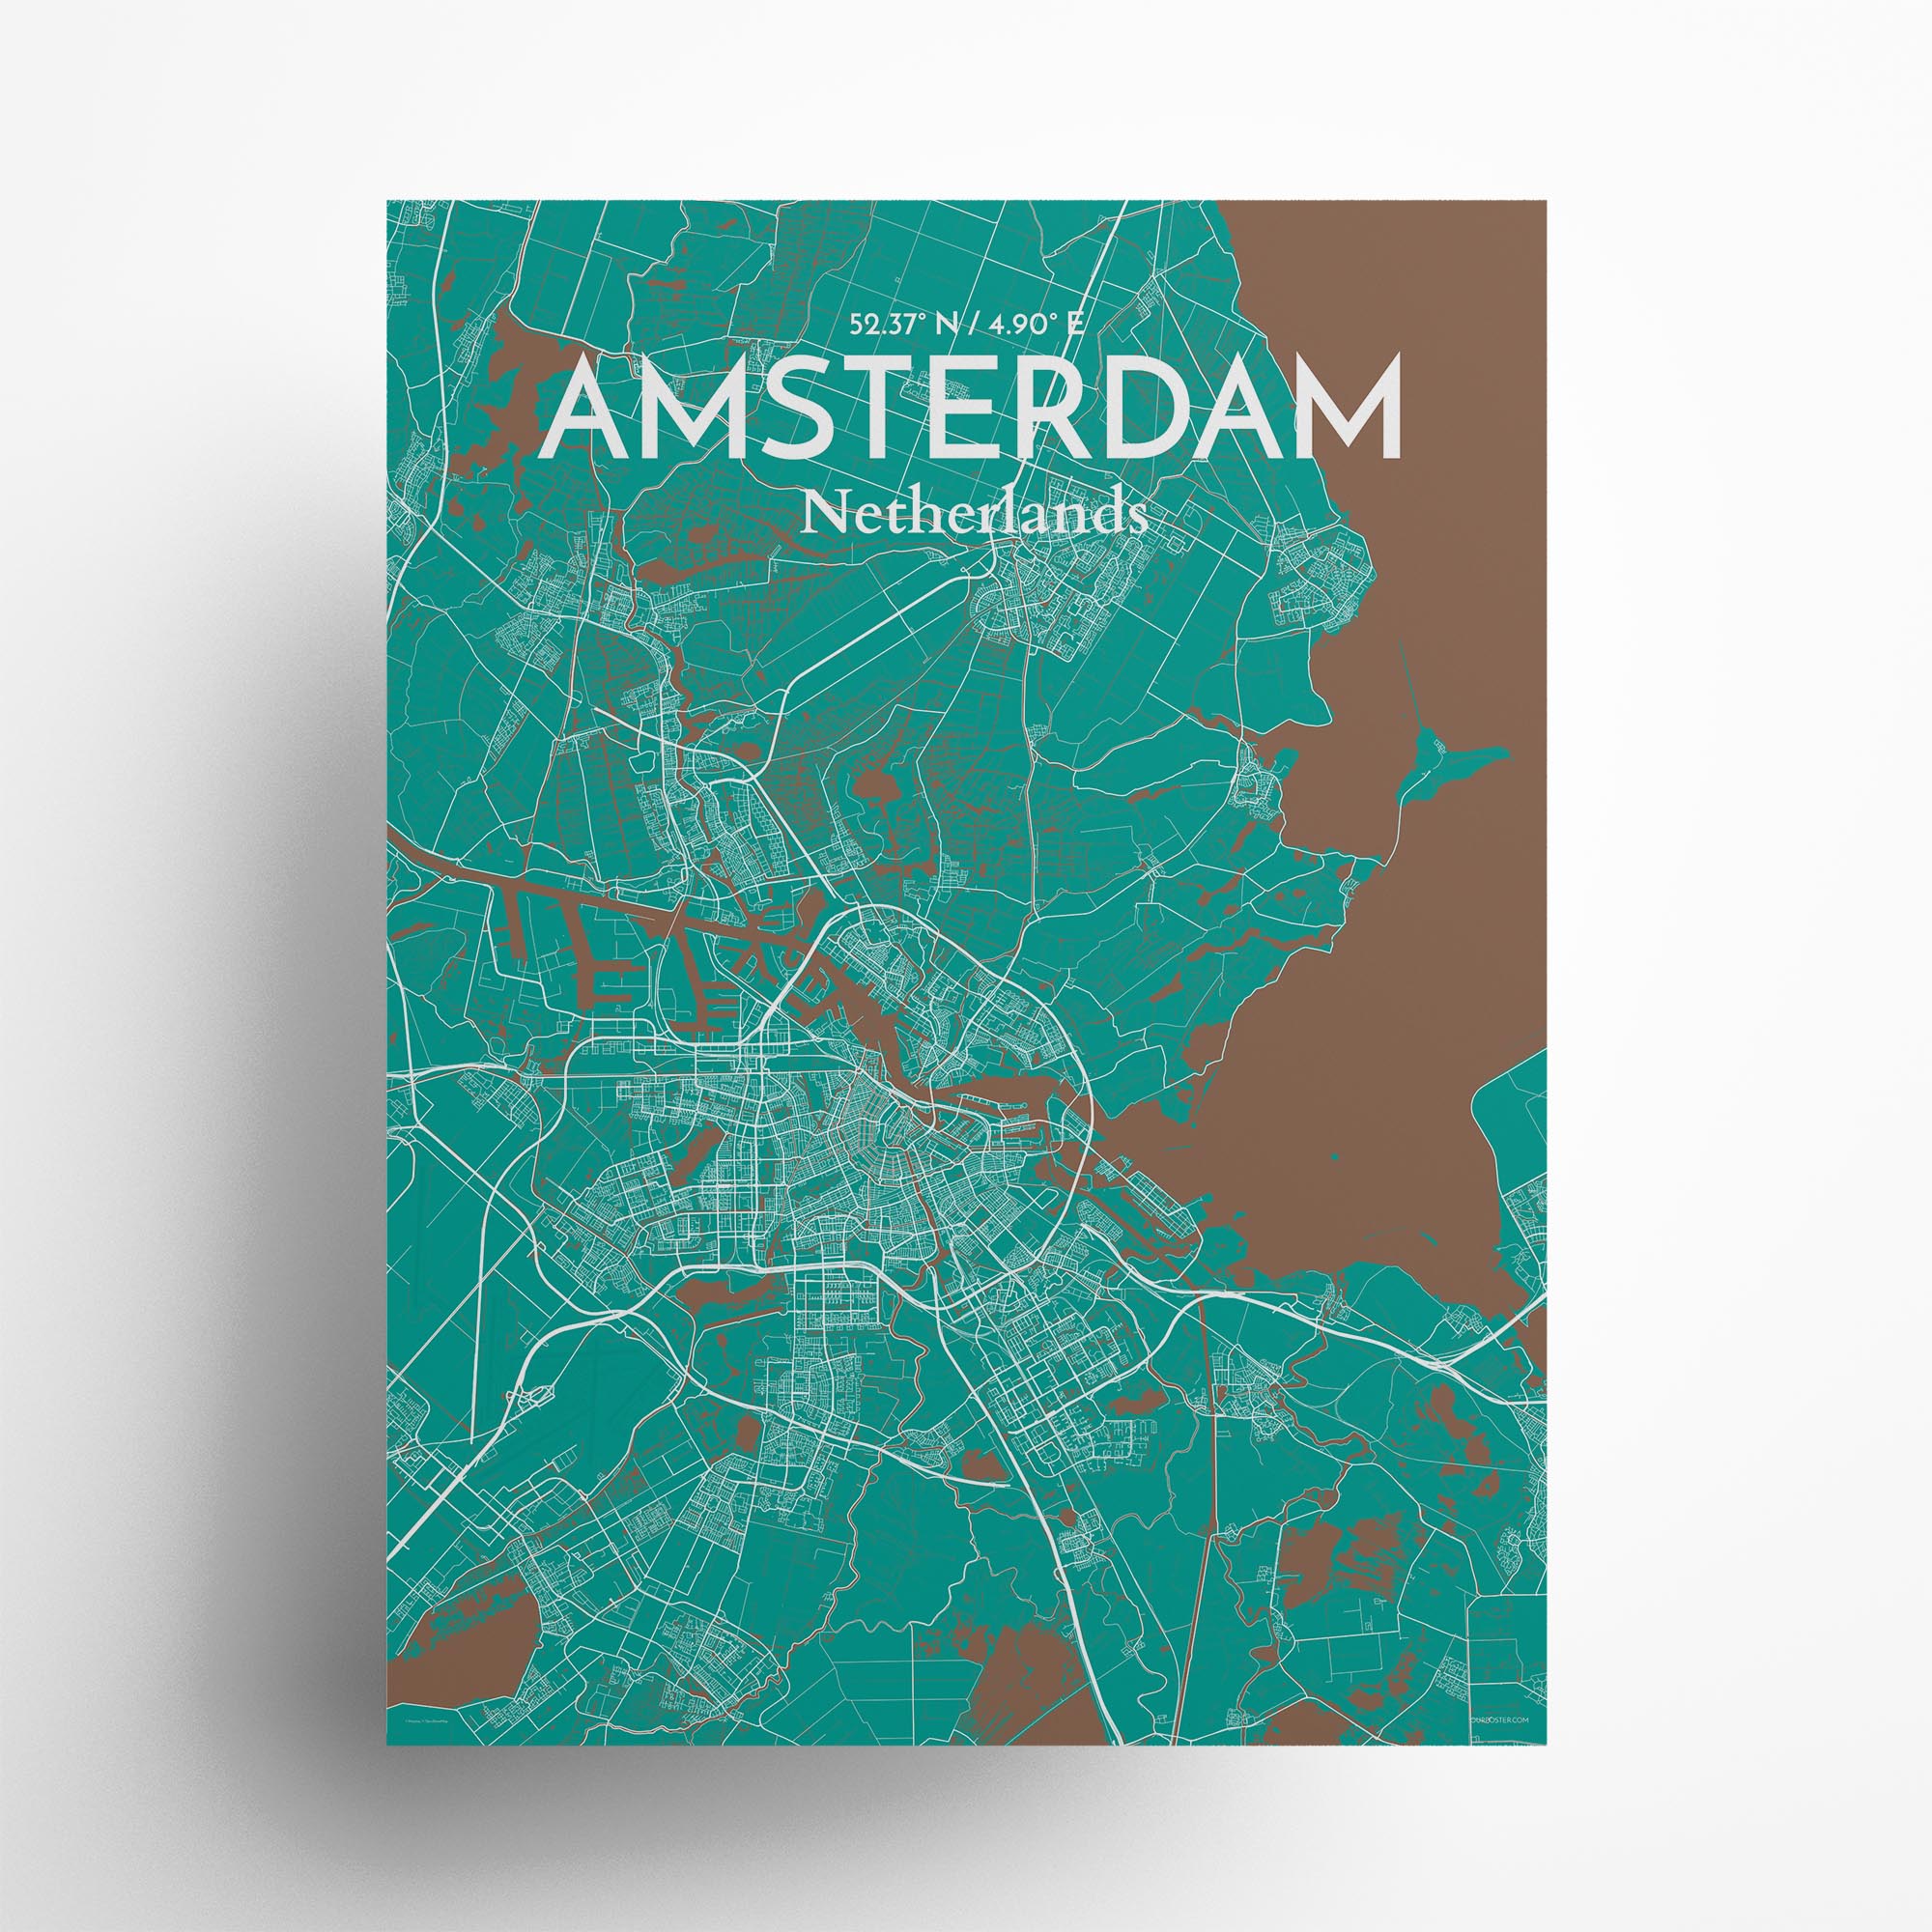 Amsterdam city map poster in Nature of size 18" x 24"